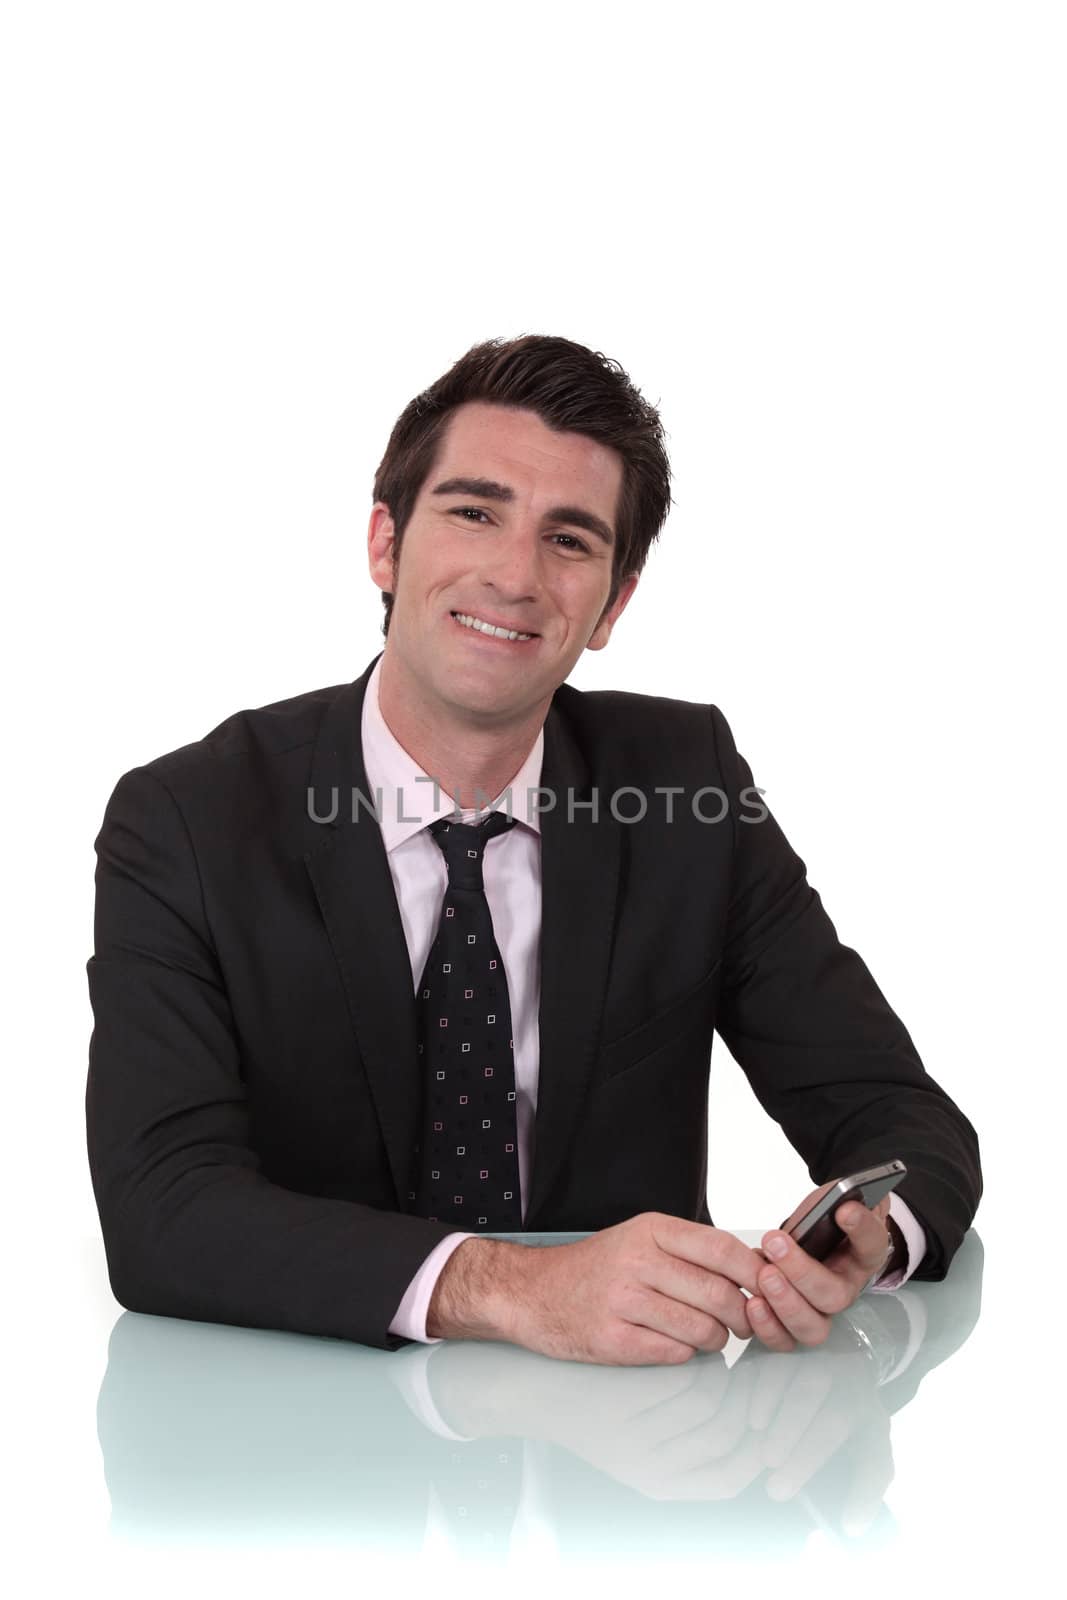 Smiling businessman looking at his mobile phone by phovoir